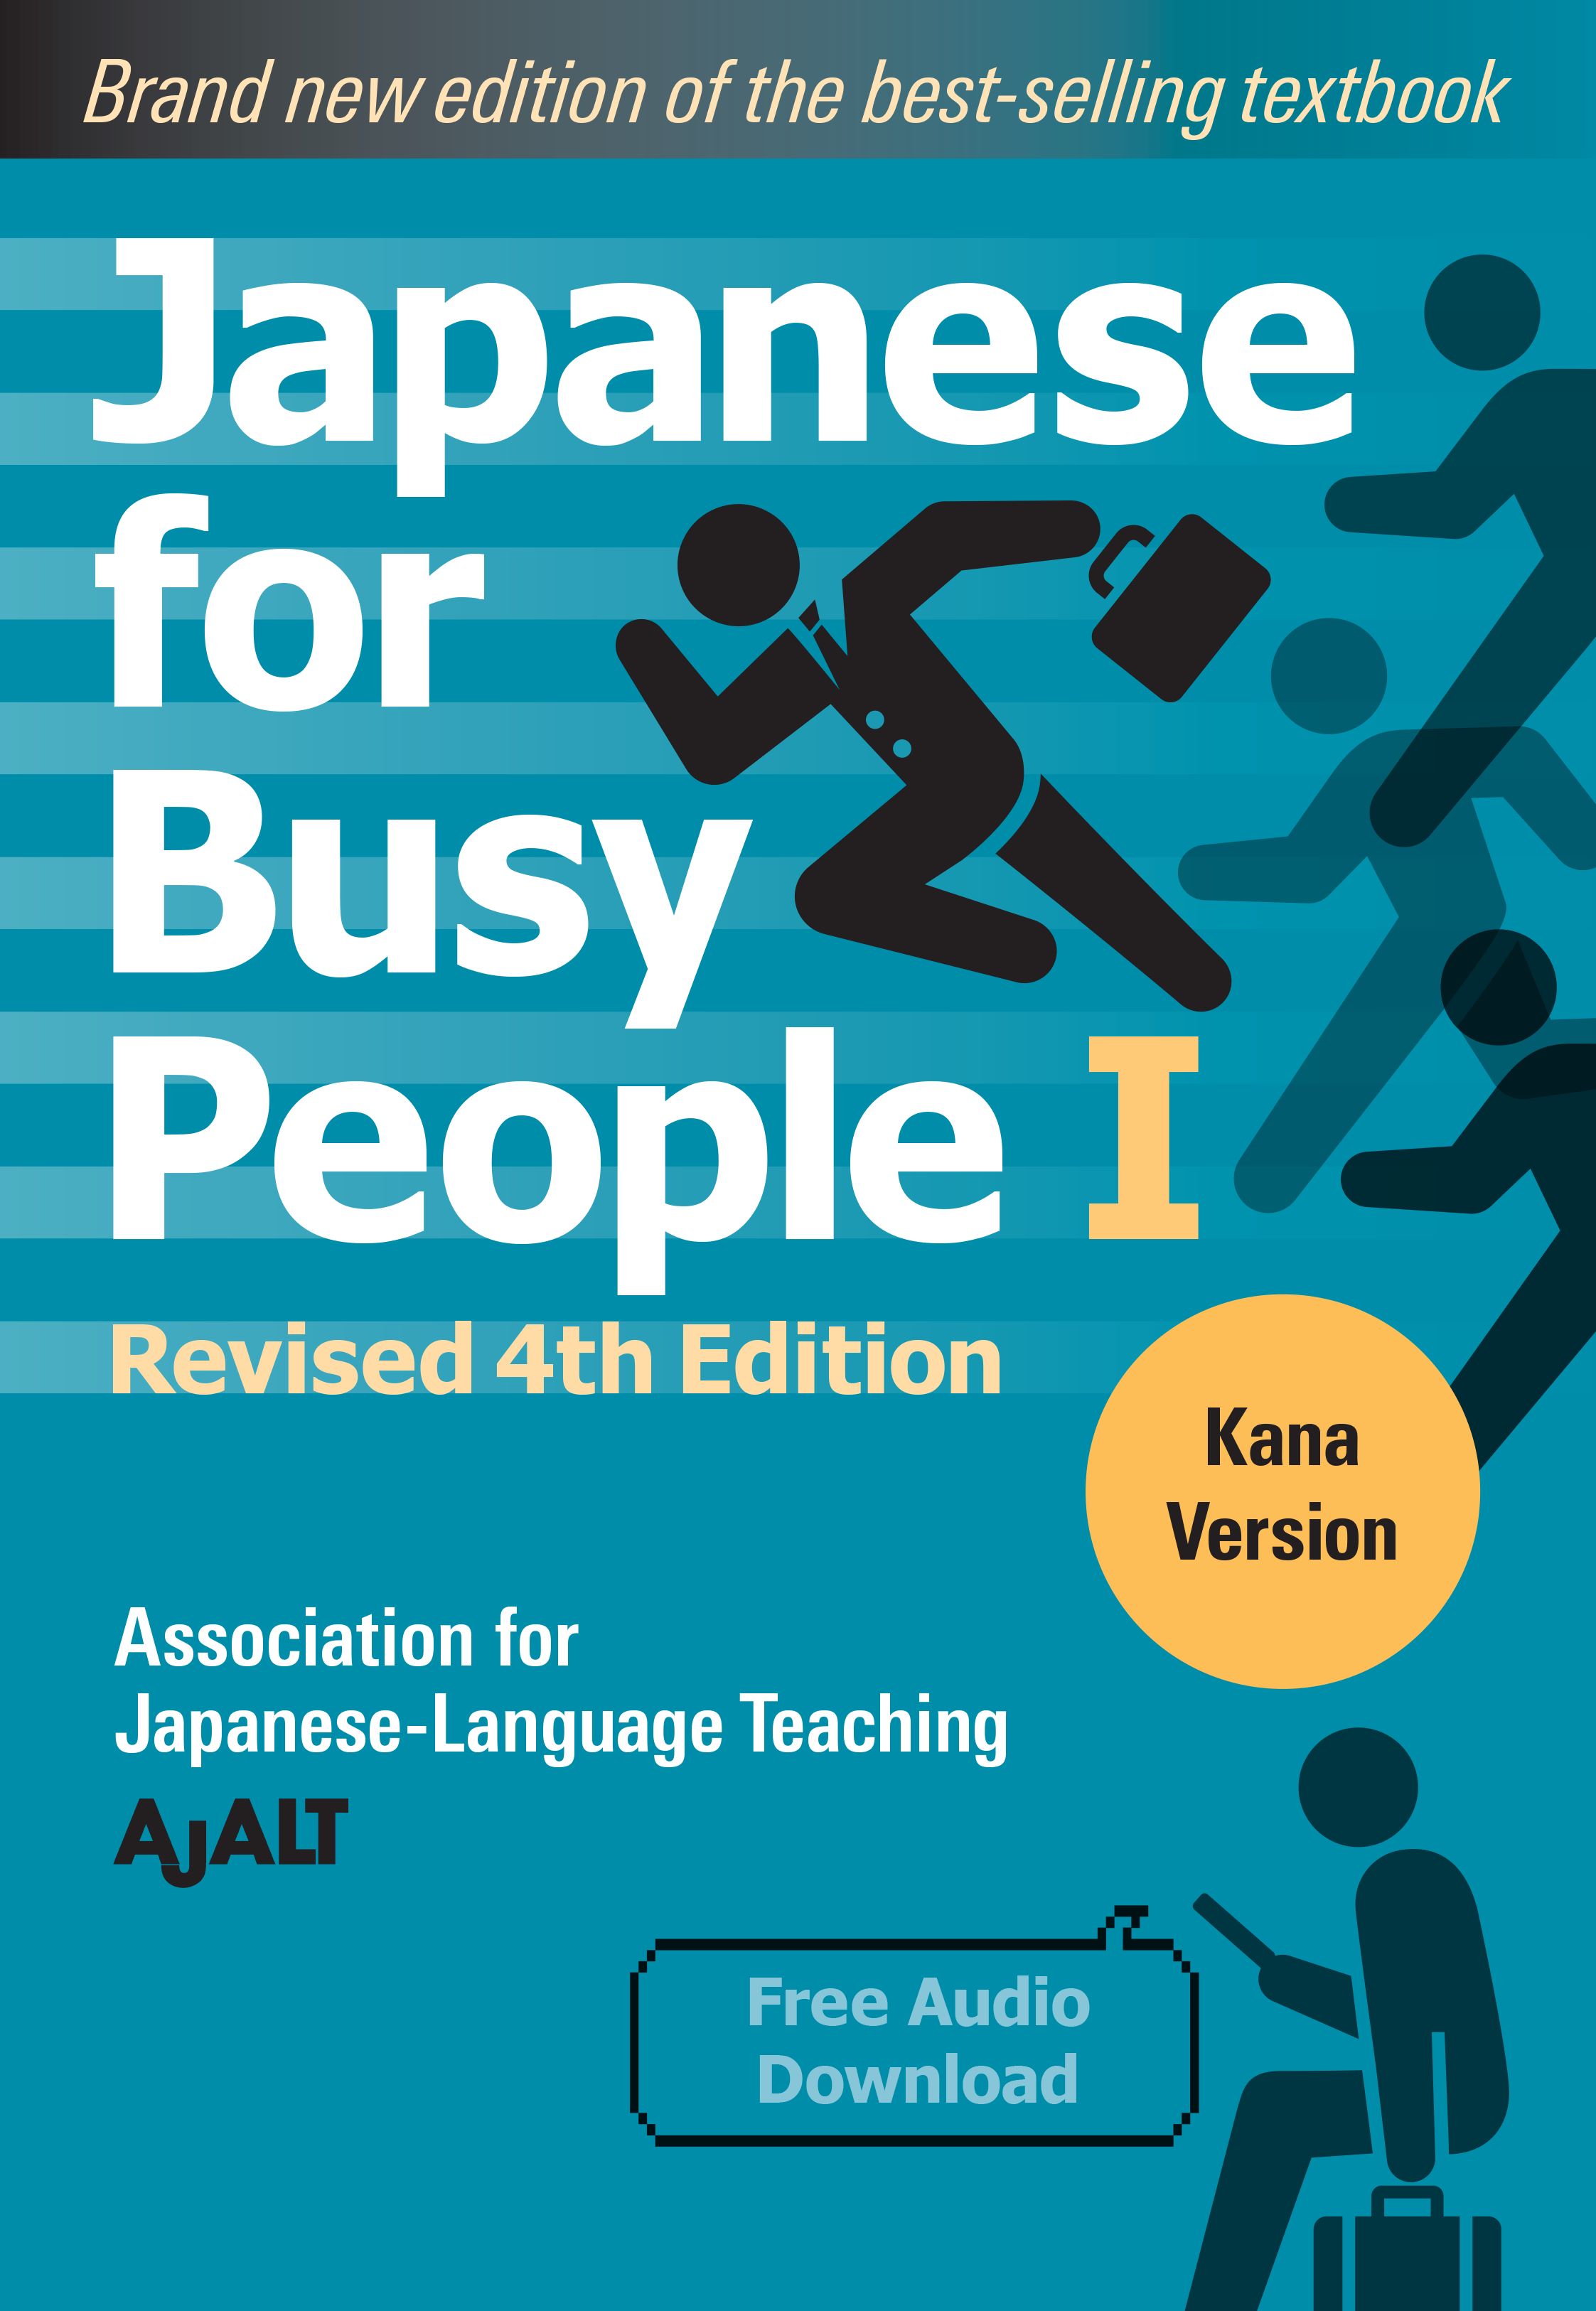 Japanese for Busy People Paperback Volume 1 Kana (4th Edition)